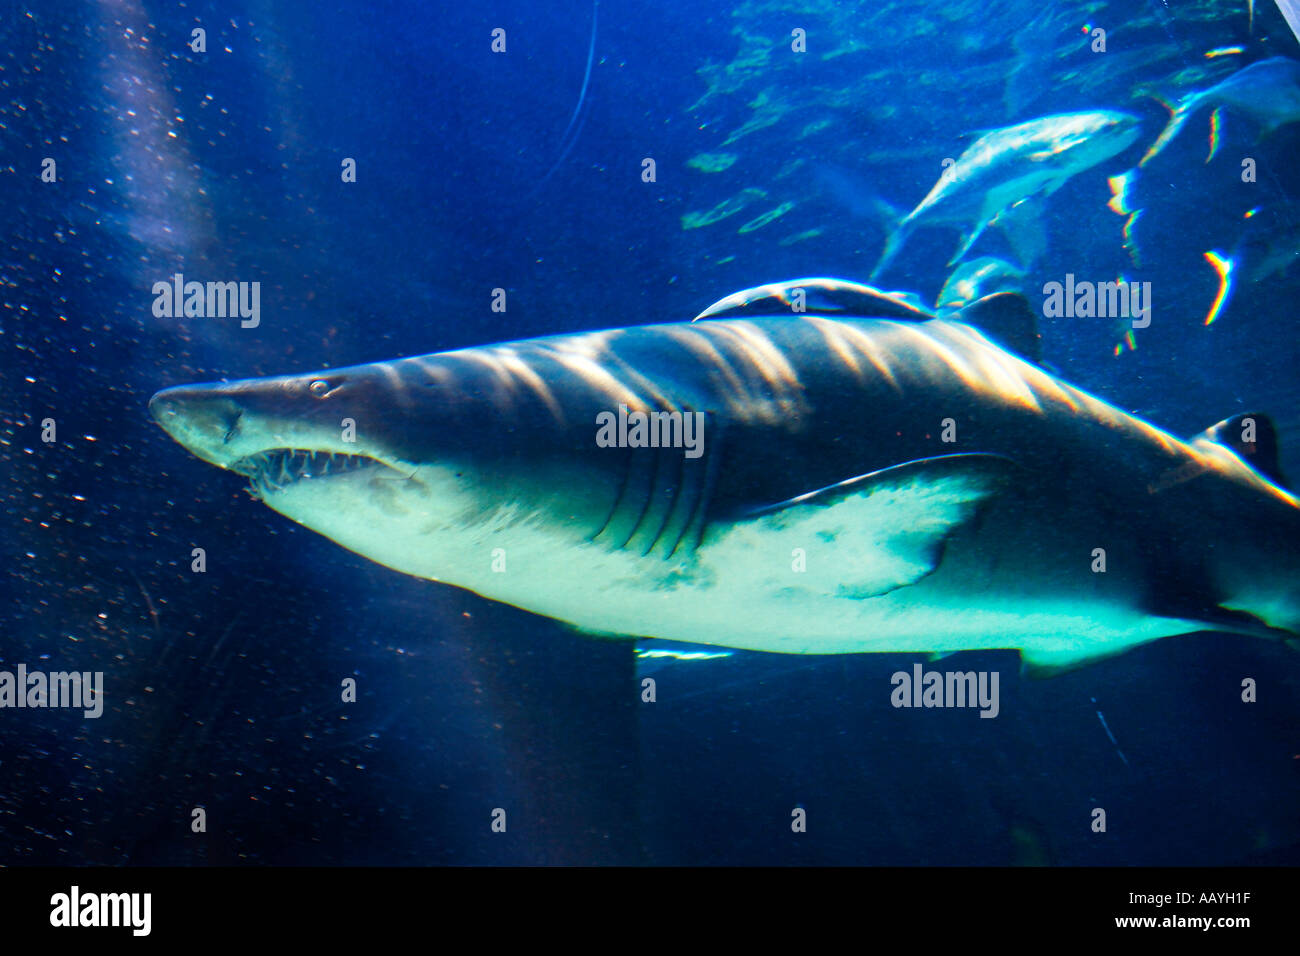 south africa cape town waterfront aquarium shark with baby Stock Photo